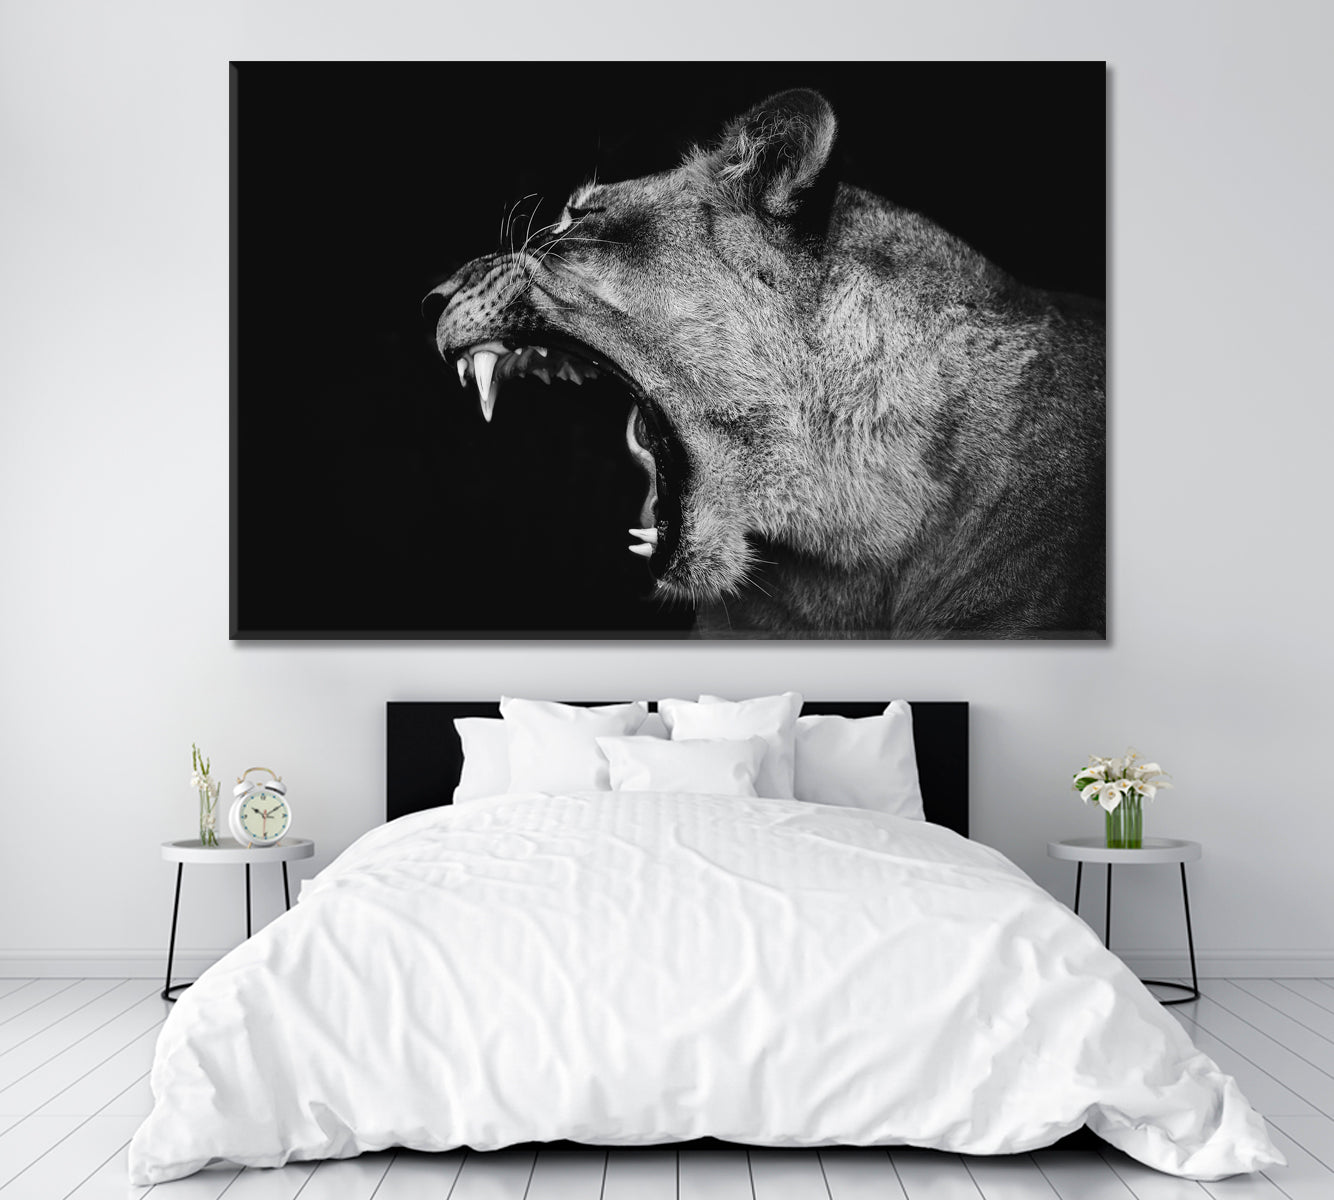 Yawning Lion Canvas Print ArtLexy 1 Panel 24"x16" inches 